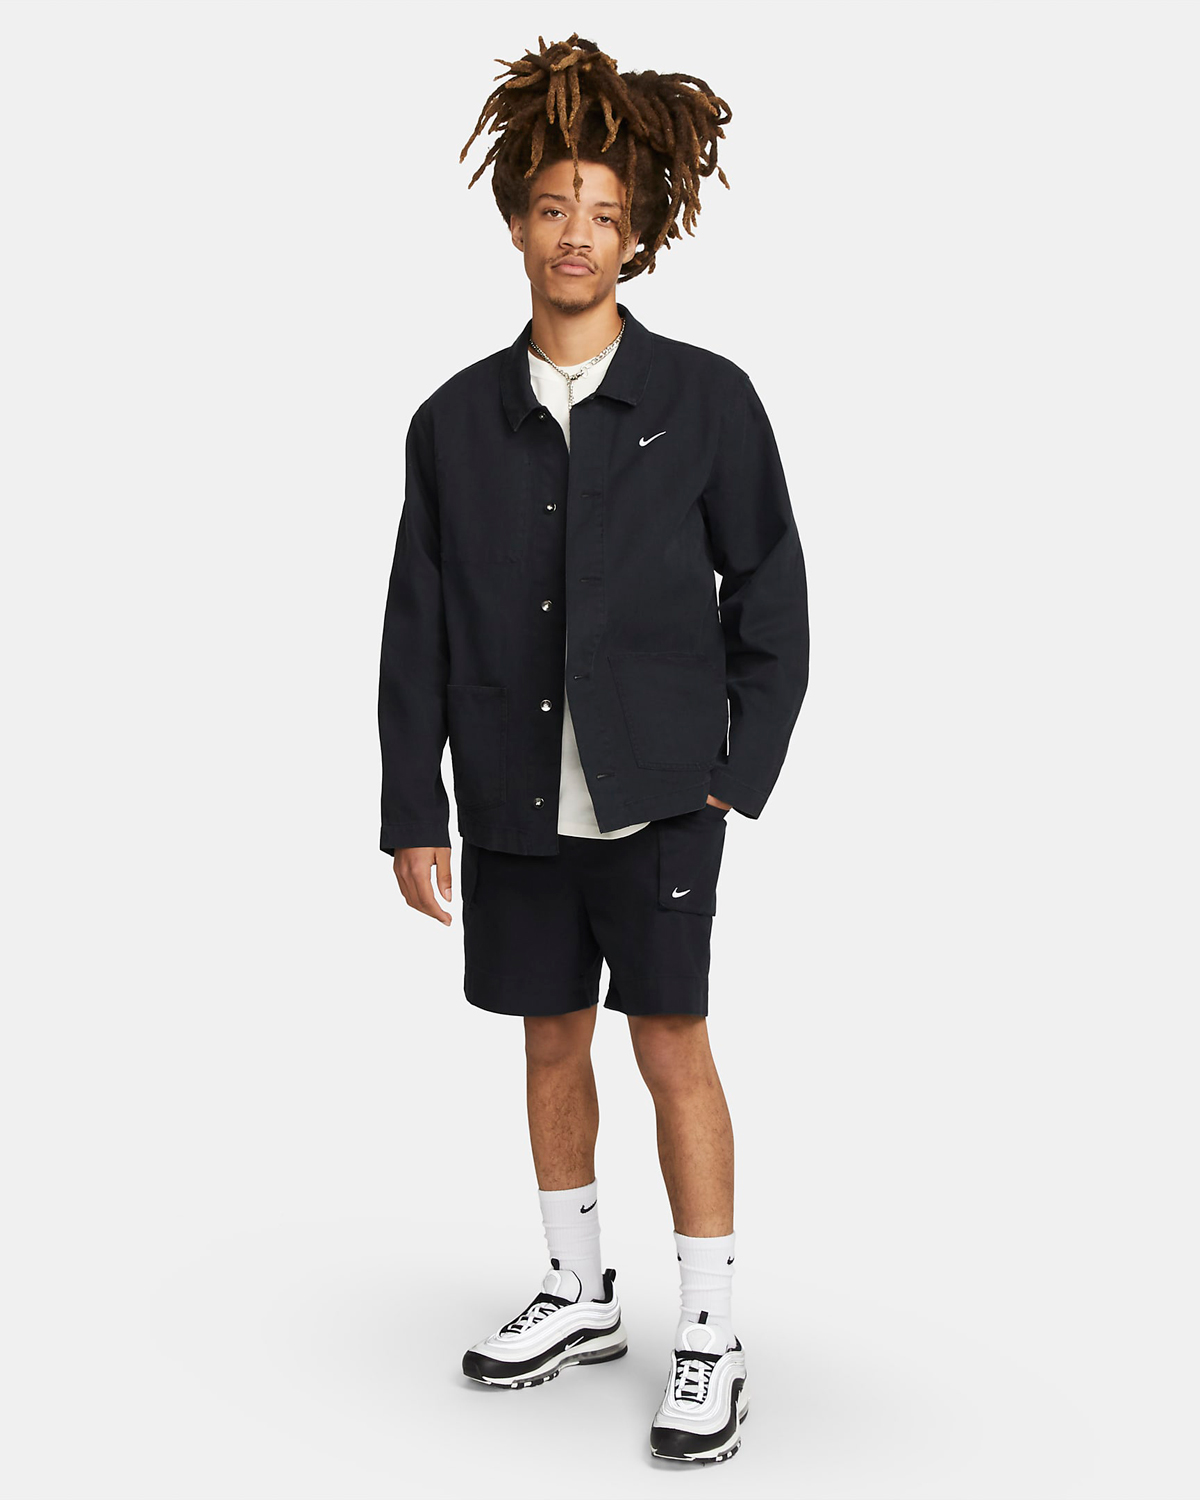 Nike-Life-Woven-Cargo-Shorts-Black-Outfit